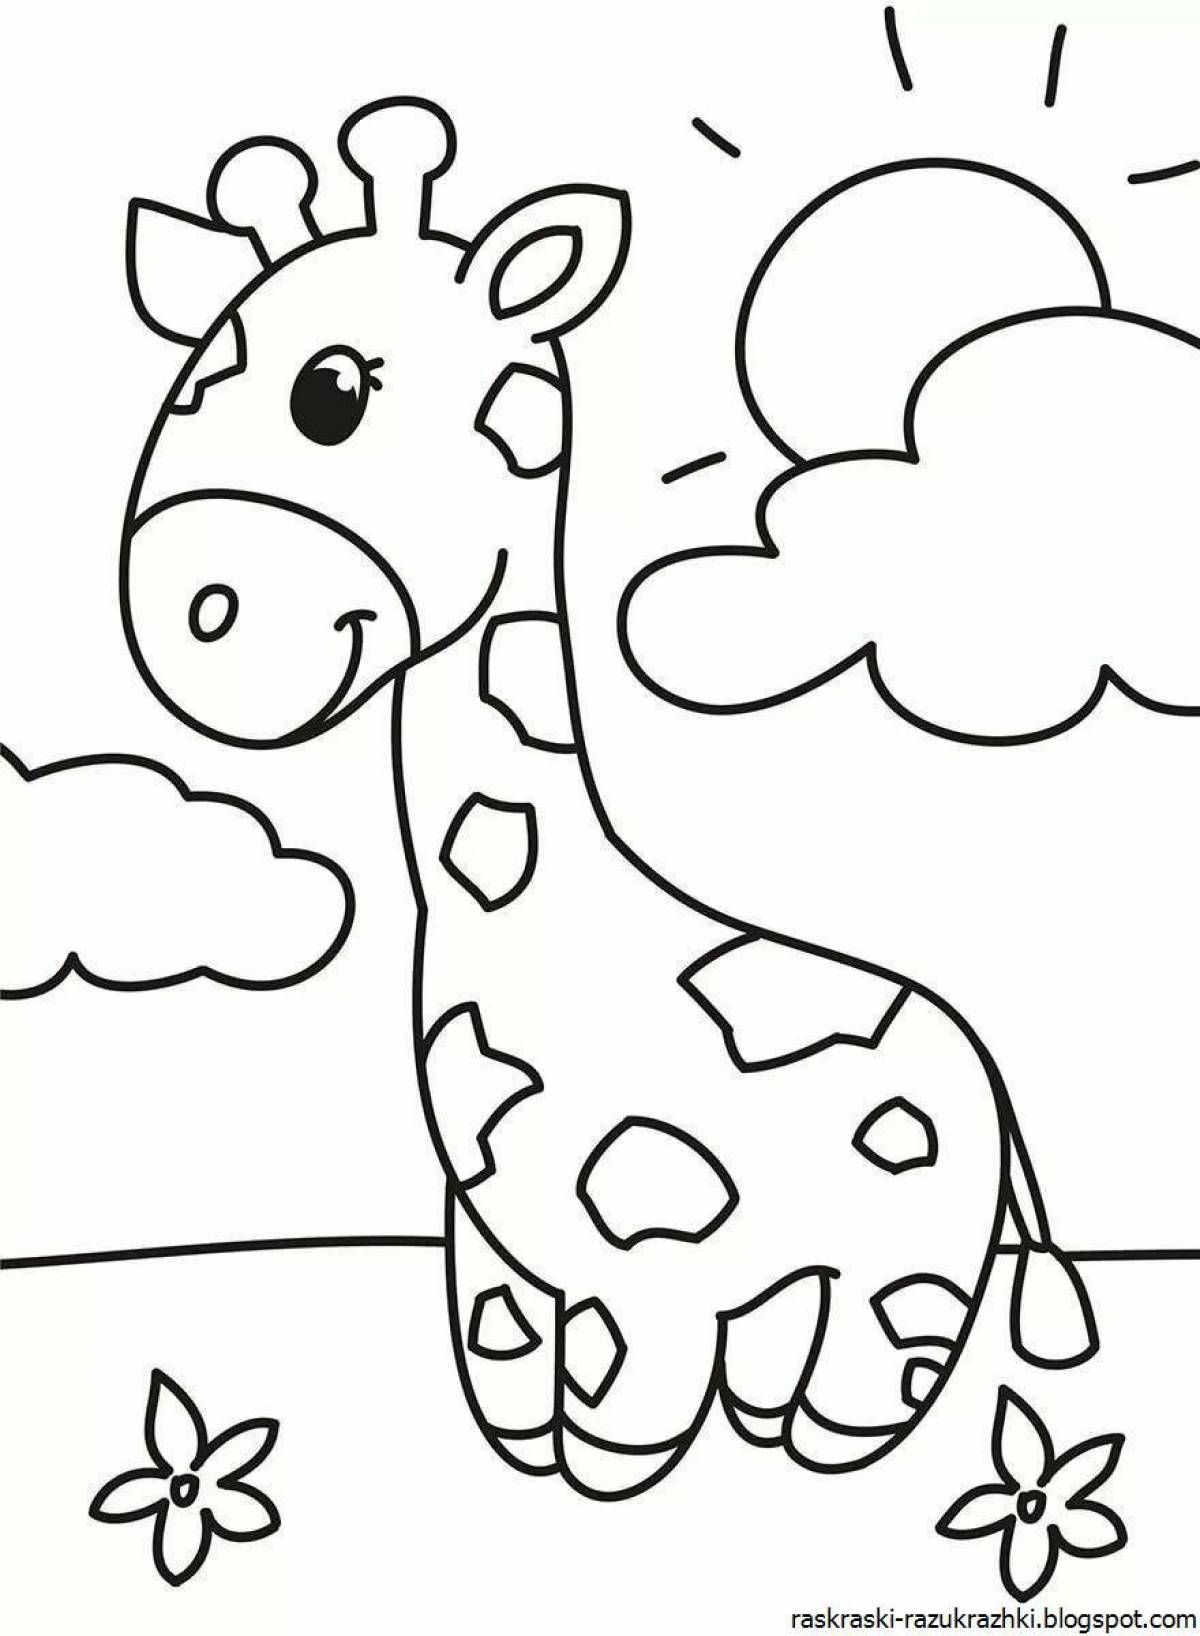 Color playful coloring book for children 5 years old